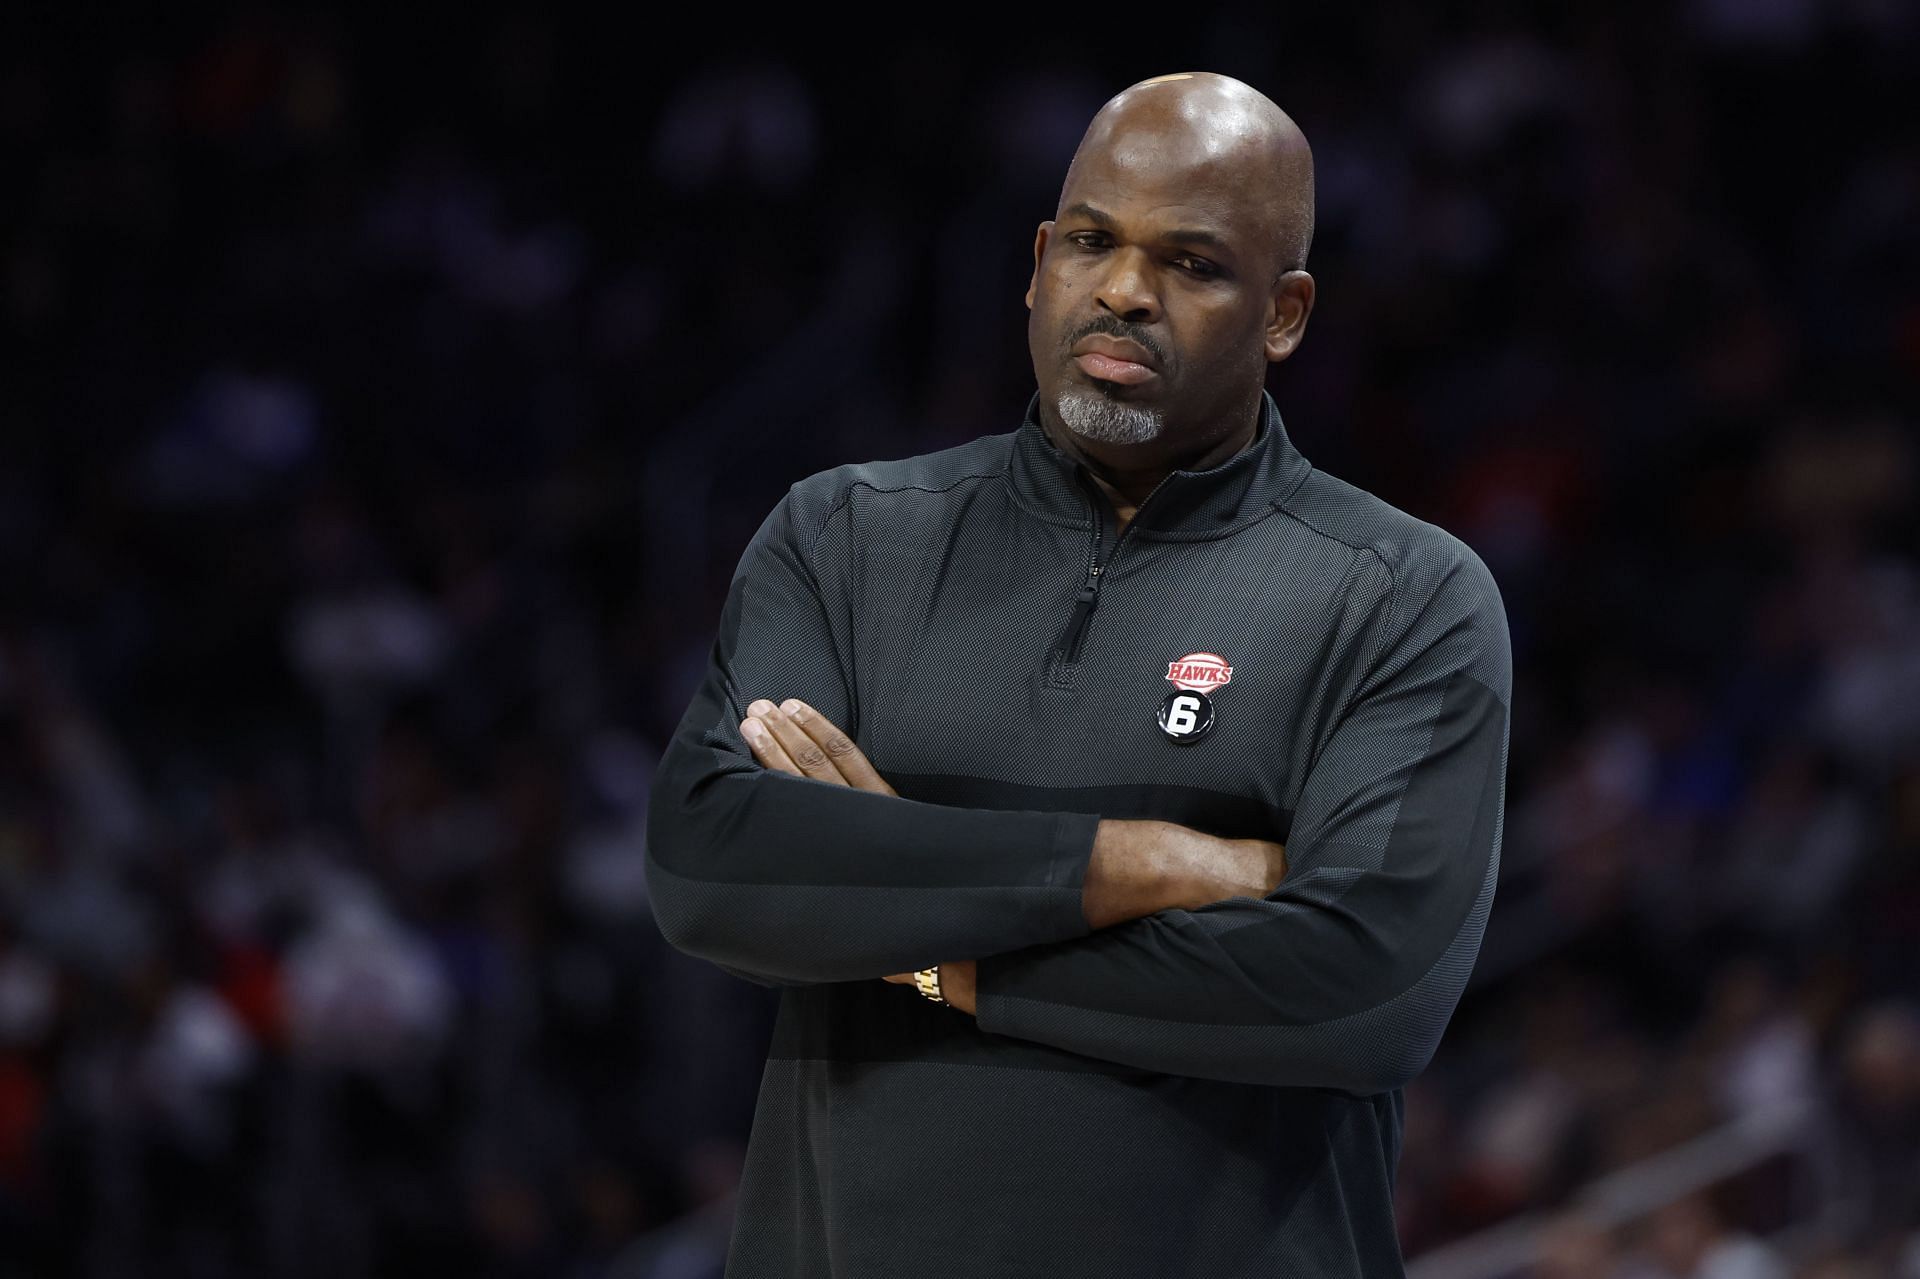 Nate McMillan looks on at a game